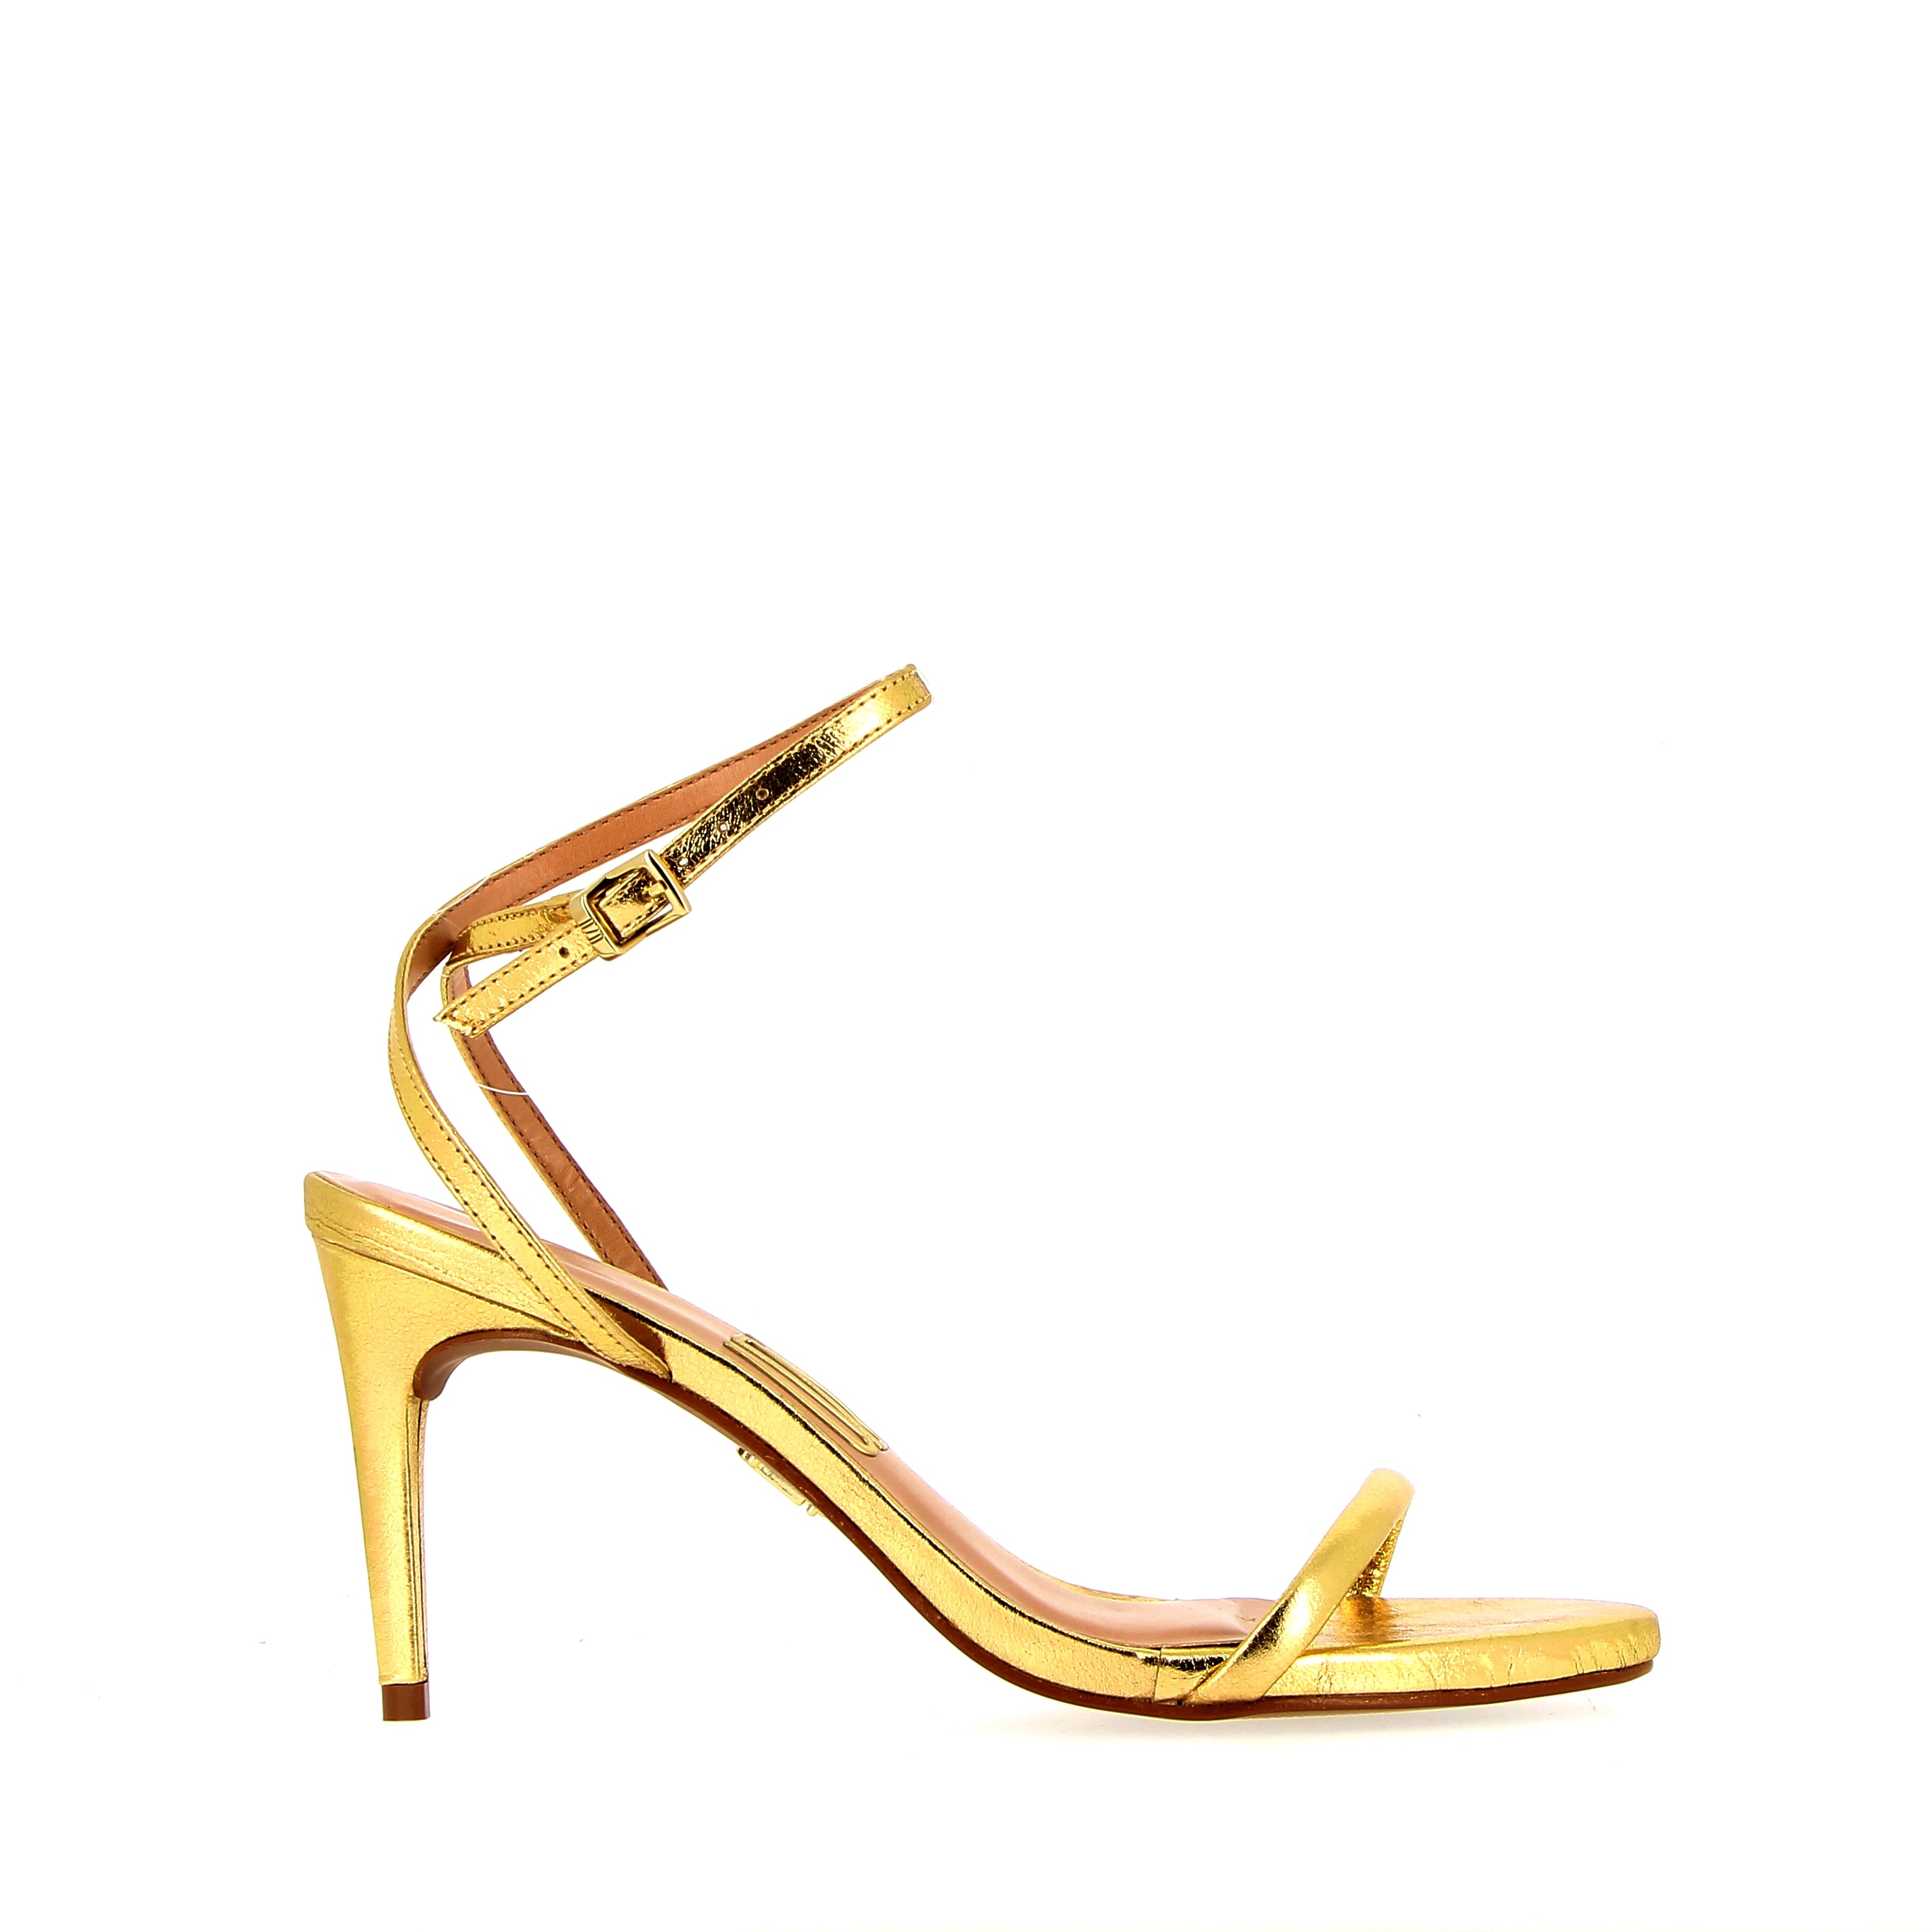 Gold sandal with ankle strap and heel